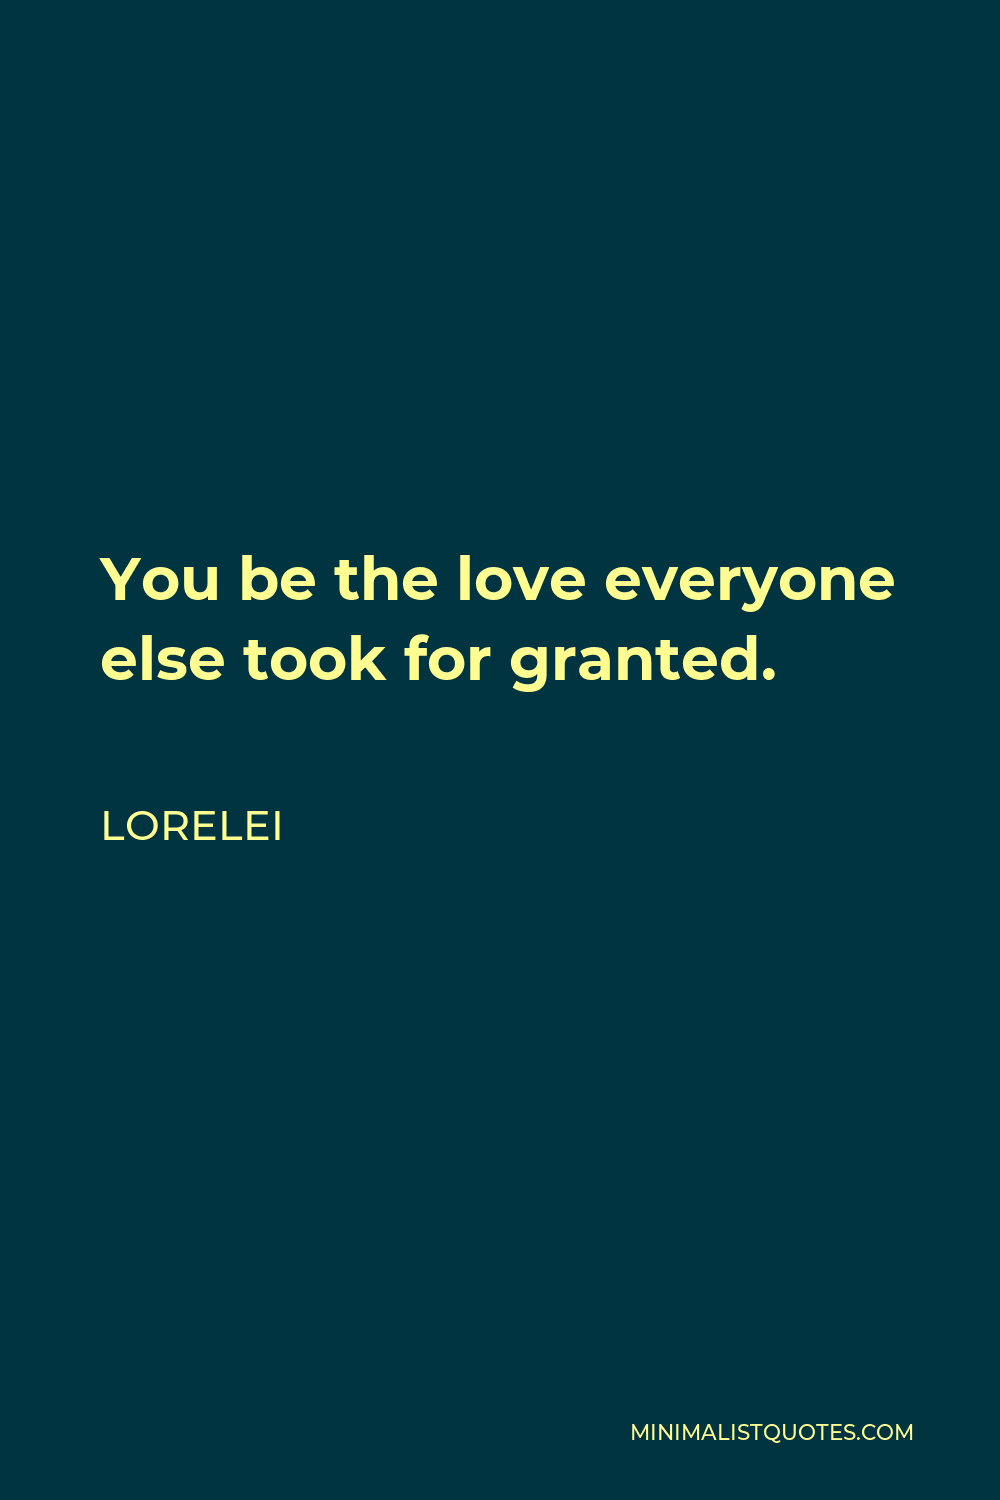 Lorelei Quote - You be the love everyone else took for granted.